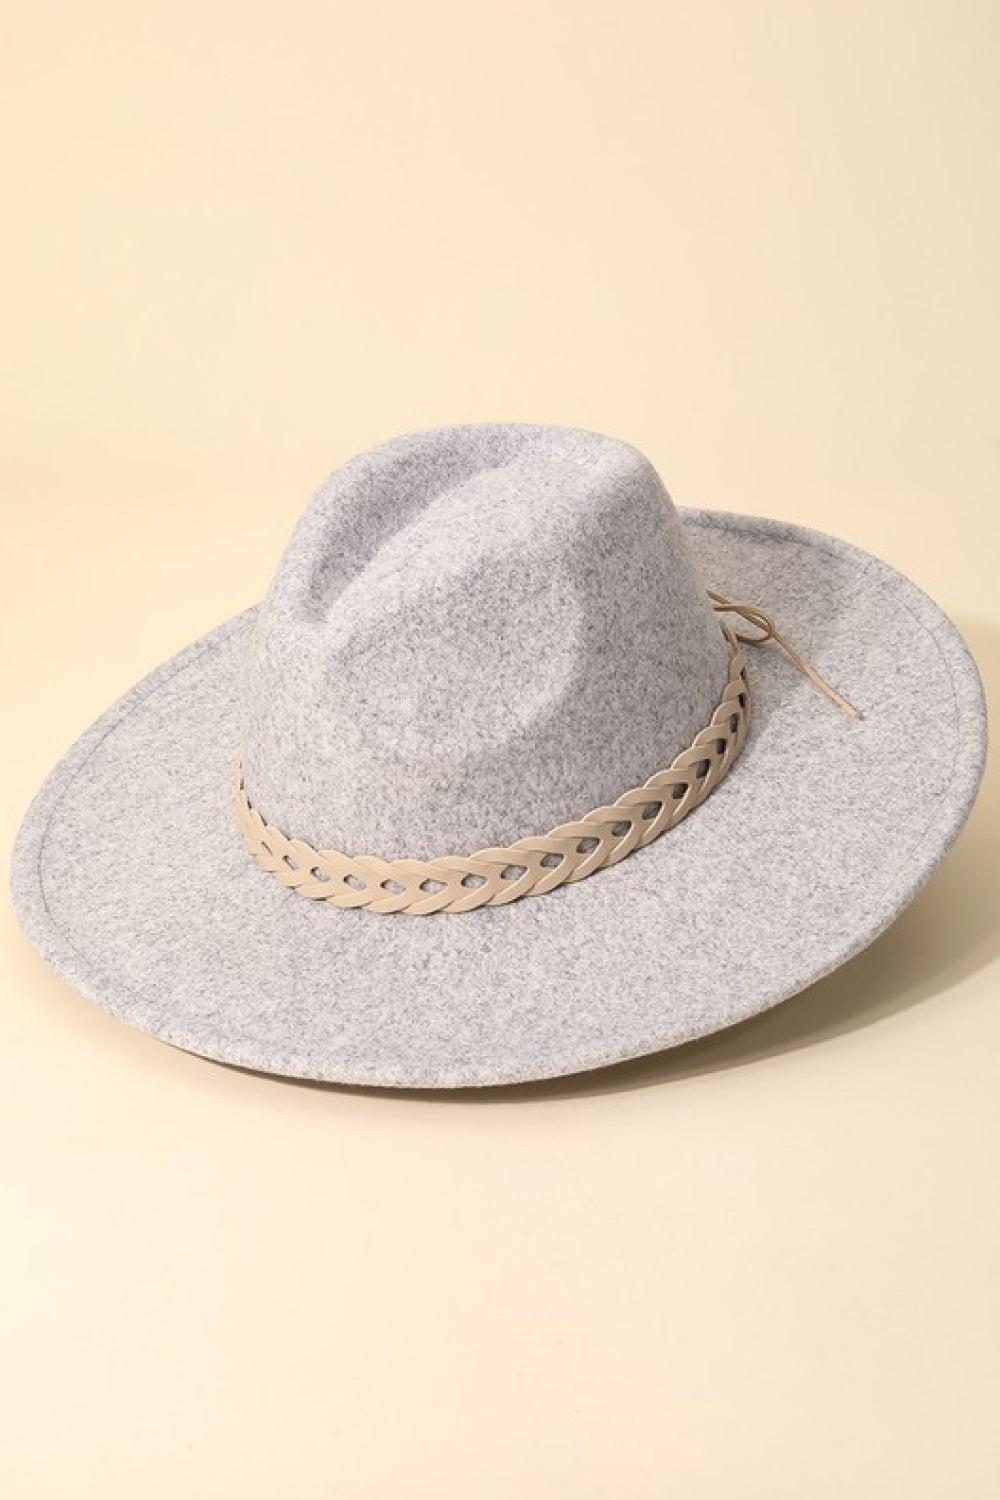 Fame Woven Together Braided Strap Fedora BLUE ZONE PLANET